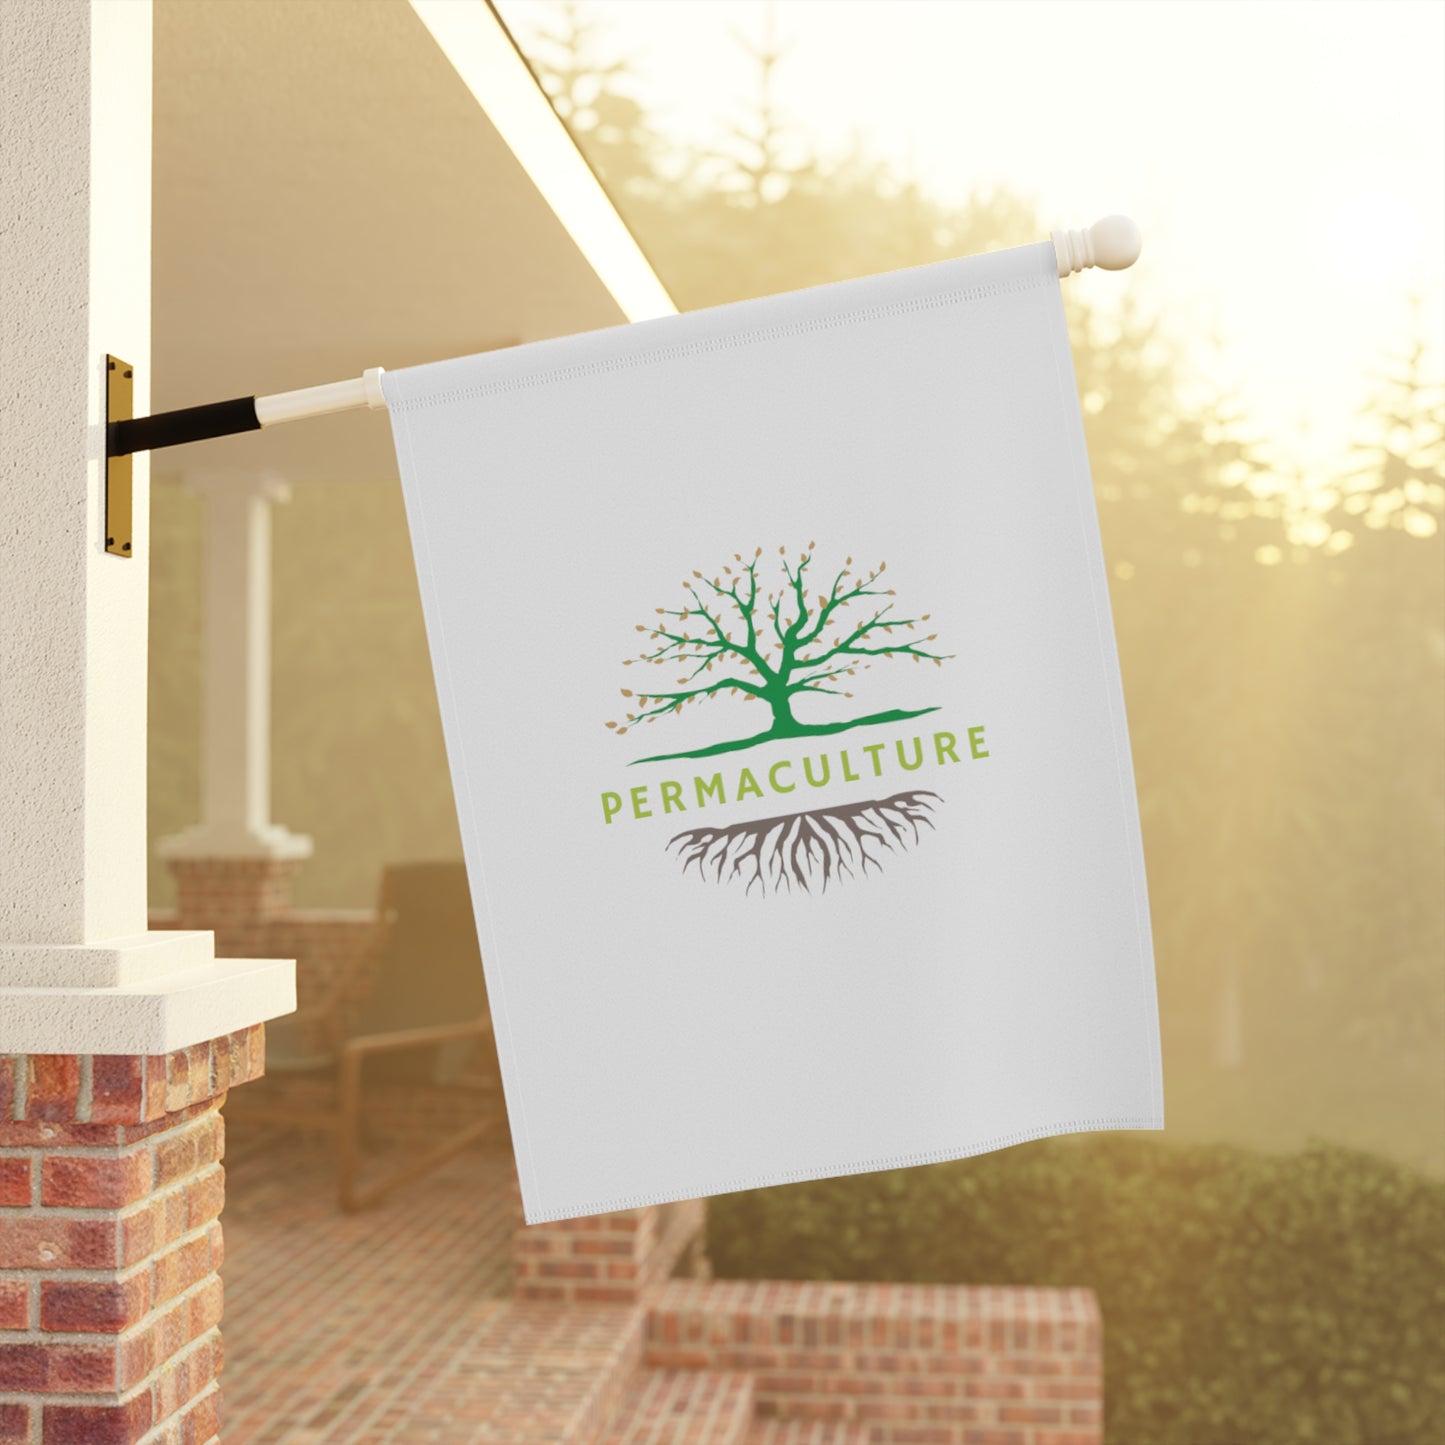 Permaculture, Garden & House Banner, White